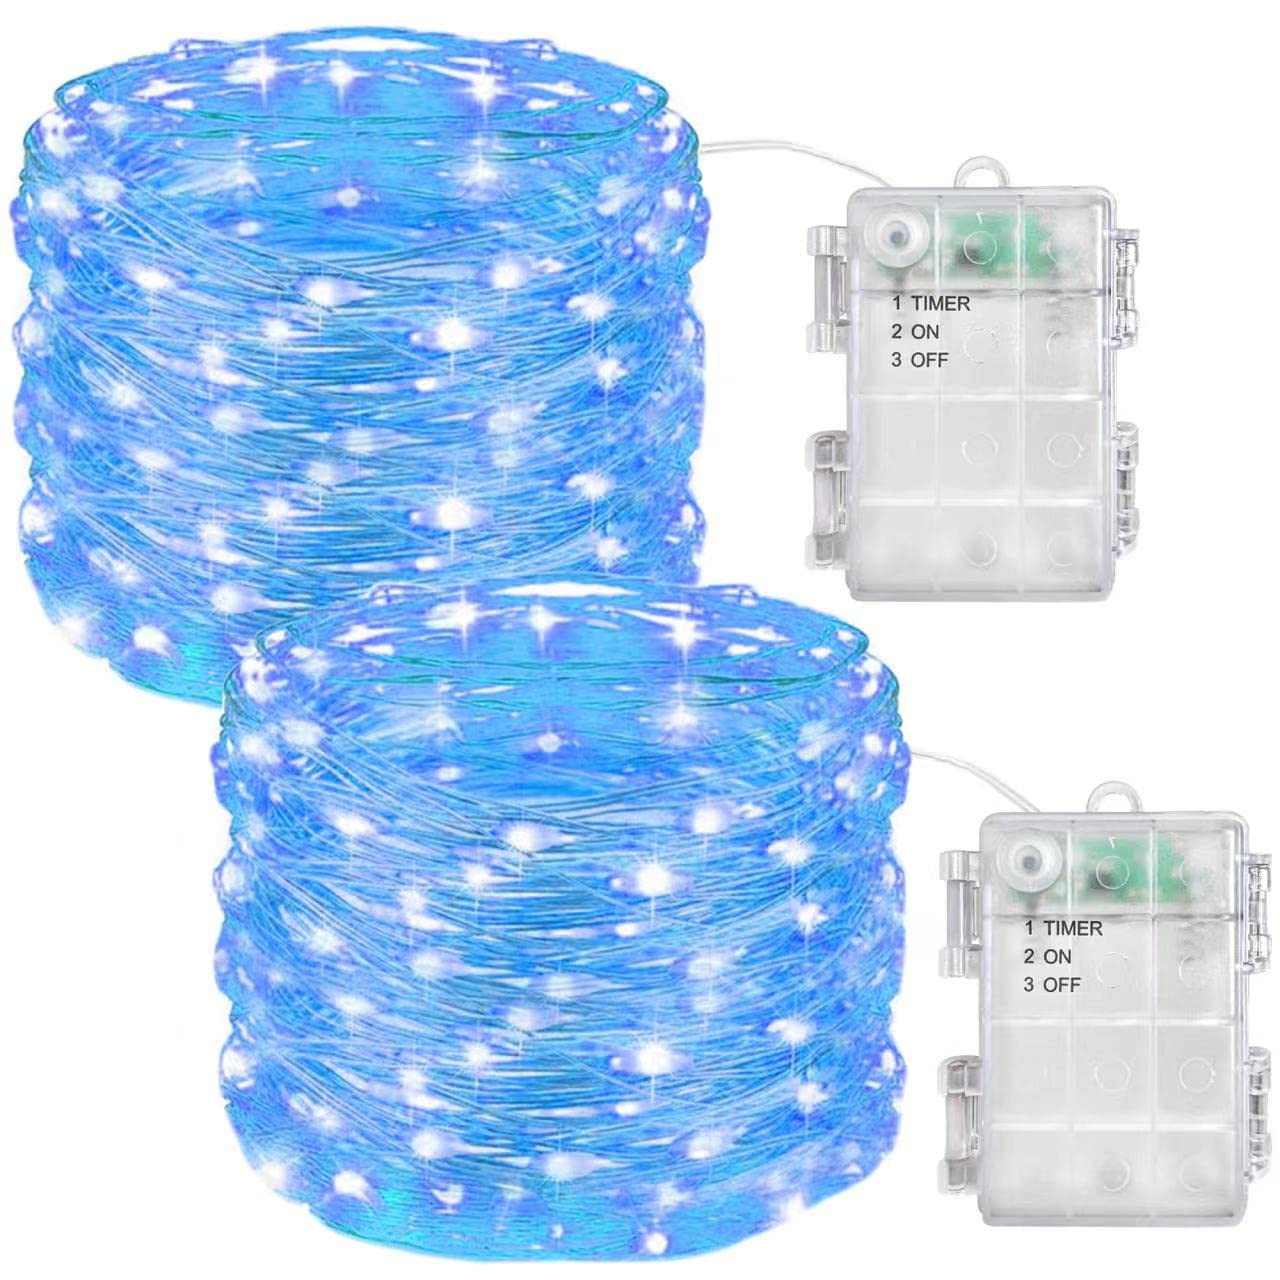 PONYOTOP String Lights,Waterproof 100 LED String Lights Fairy String Lights Starry ,Battery Operated String Lights for Wedding H